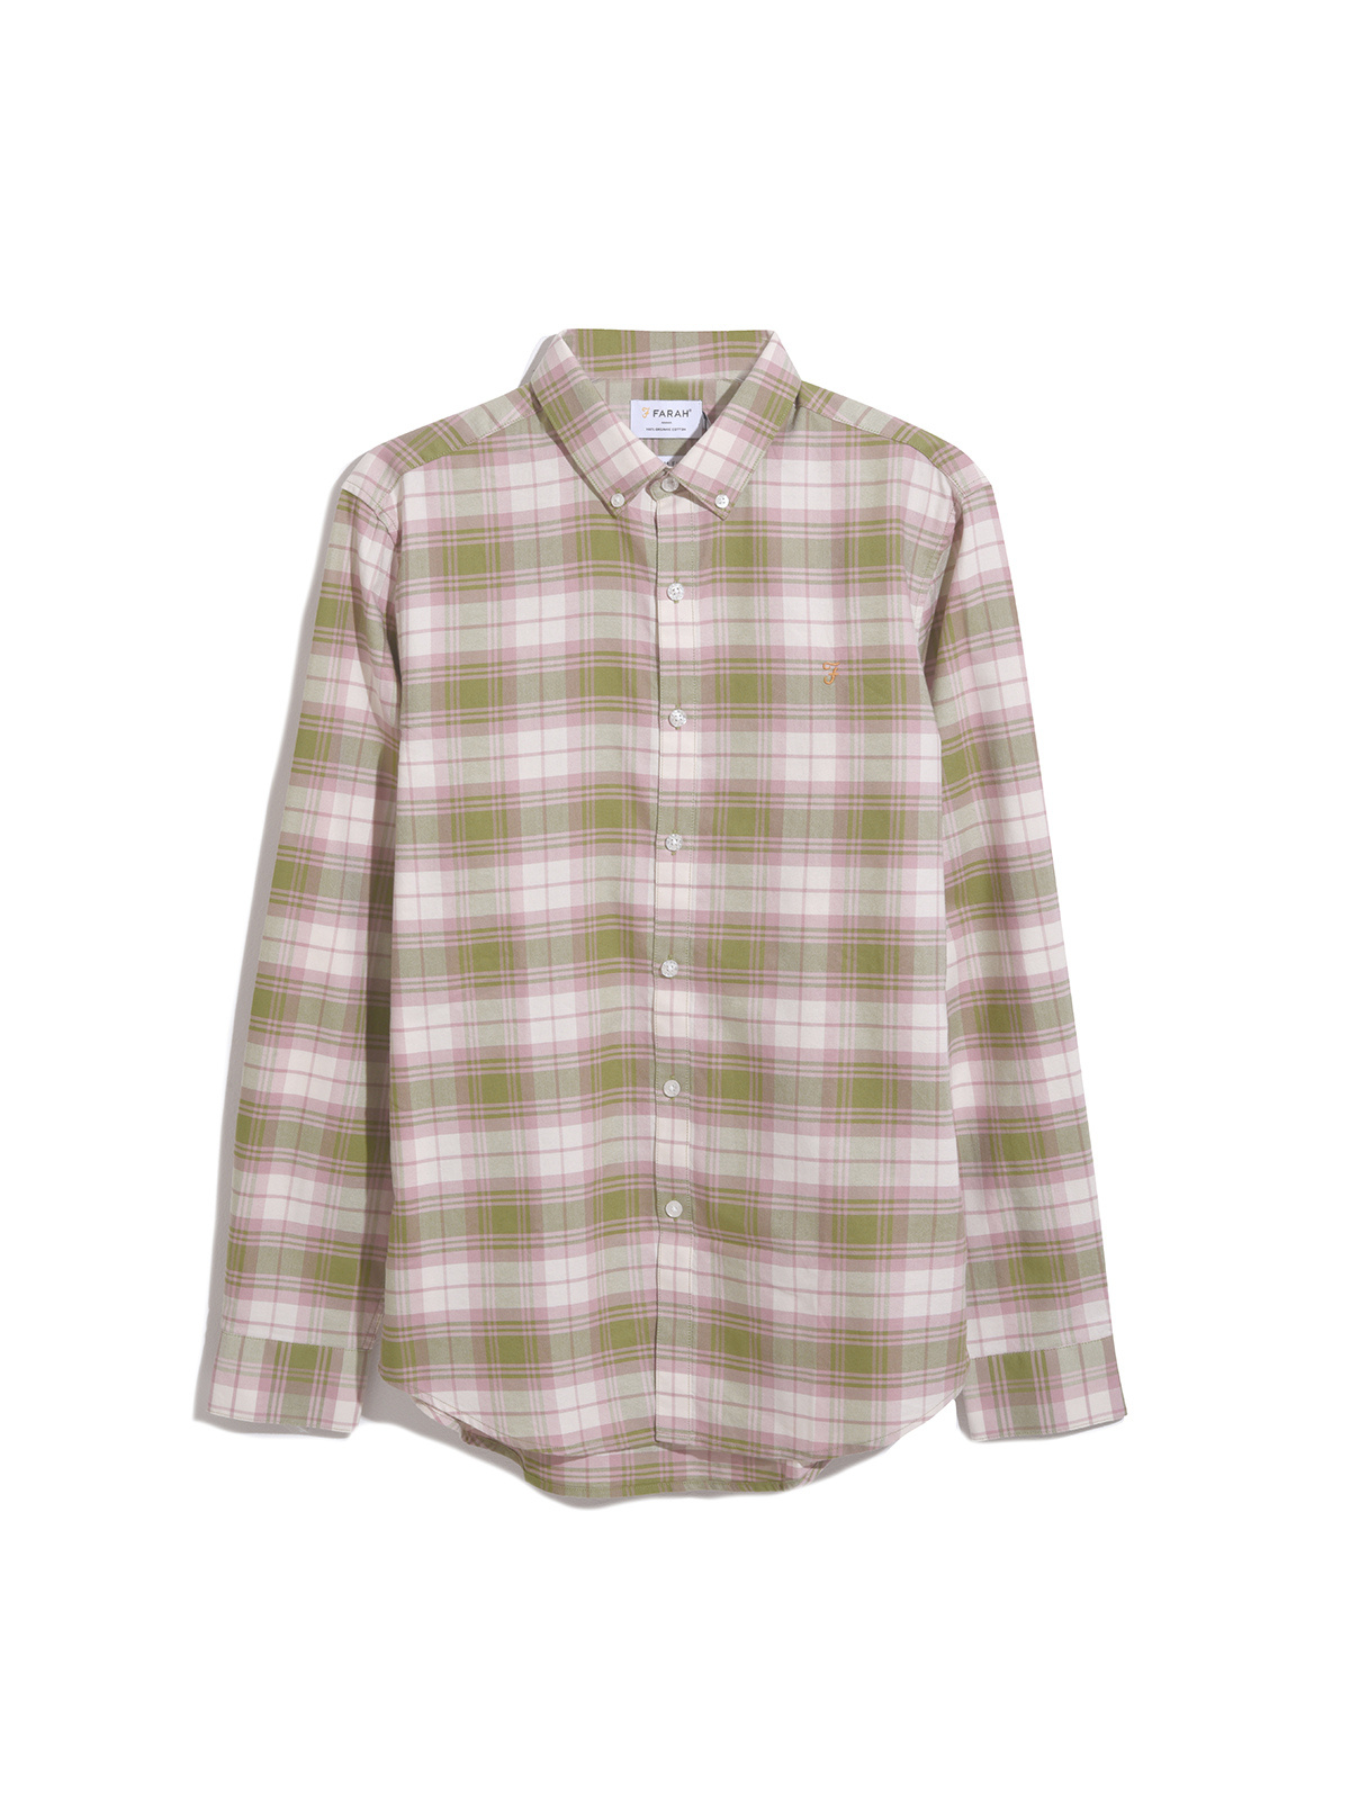 View Brewer Slim Fit Check Organic Cotton Long Sleeve Shirt In Moss Green information